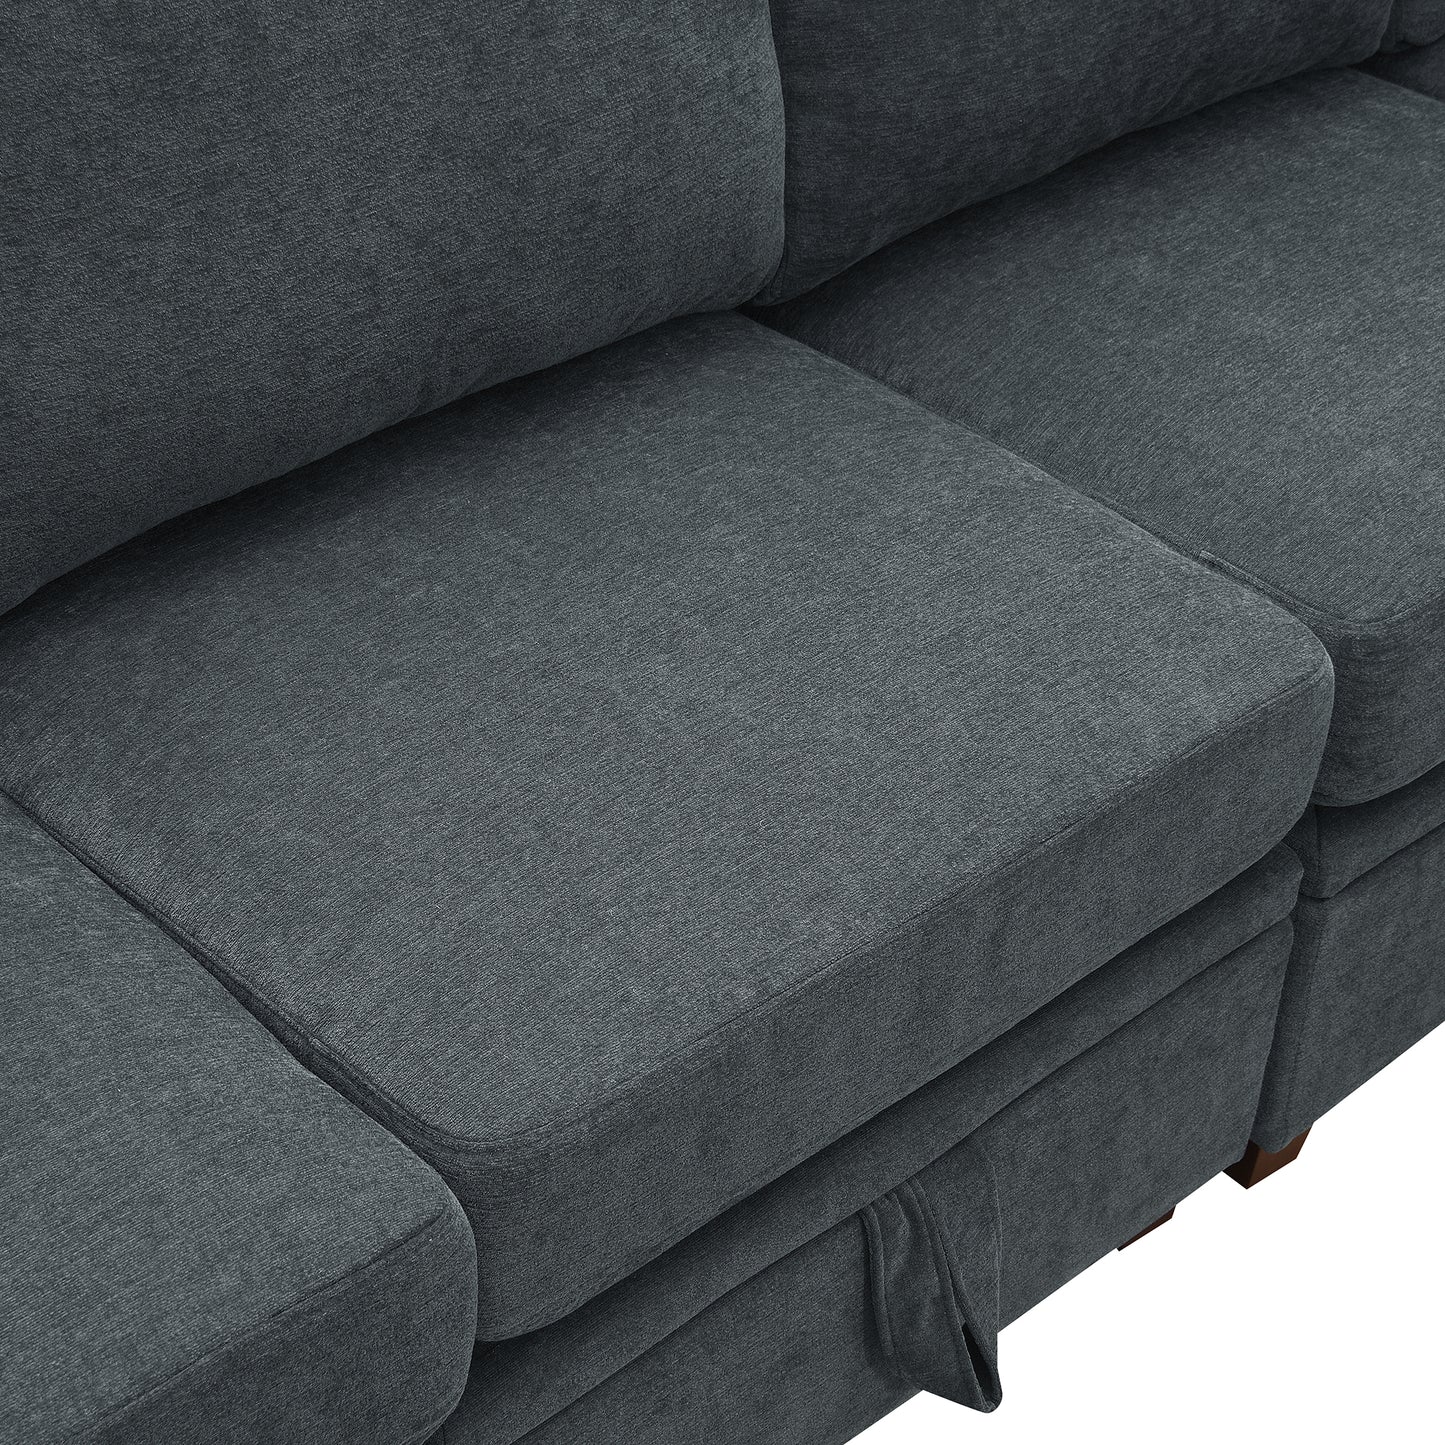 Chenille U-Shaped Sofa with Adjustable Armrests and Storage Seats